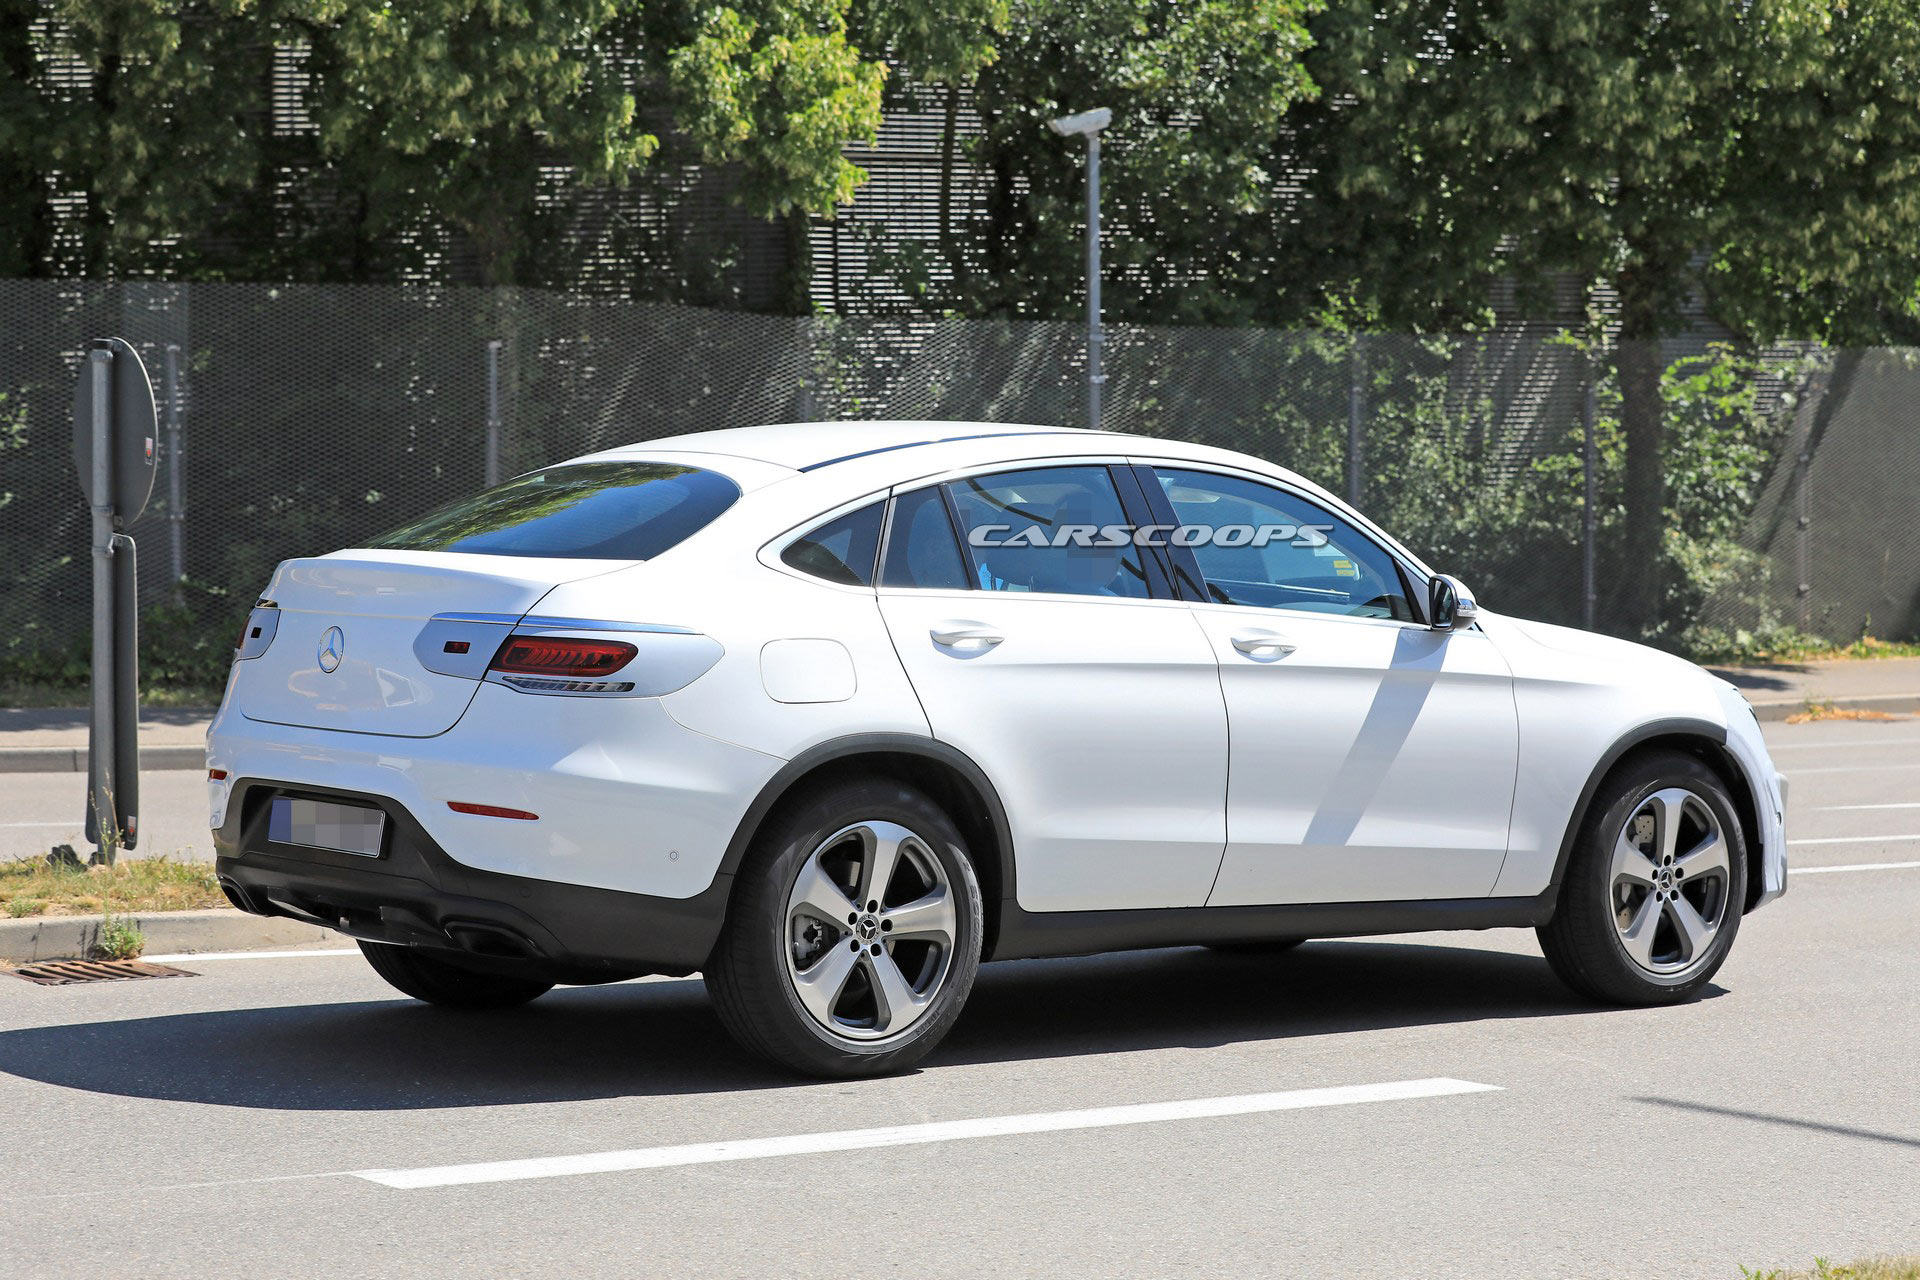 Mercedes-Benz-GLC-Coupe-2020-lo-anh-chay-thu-voi-den-pha-dam-chat-choi-anh-3